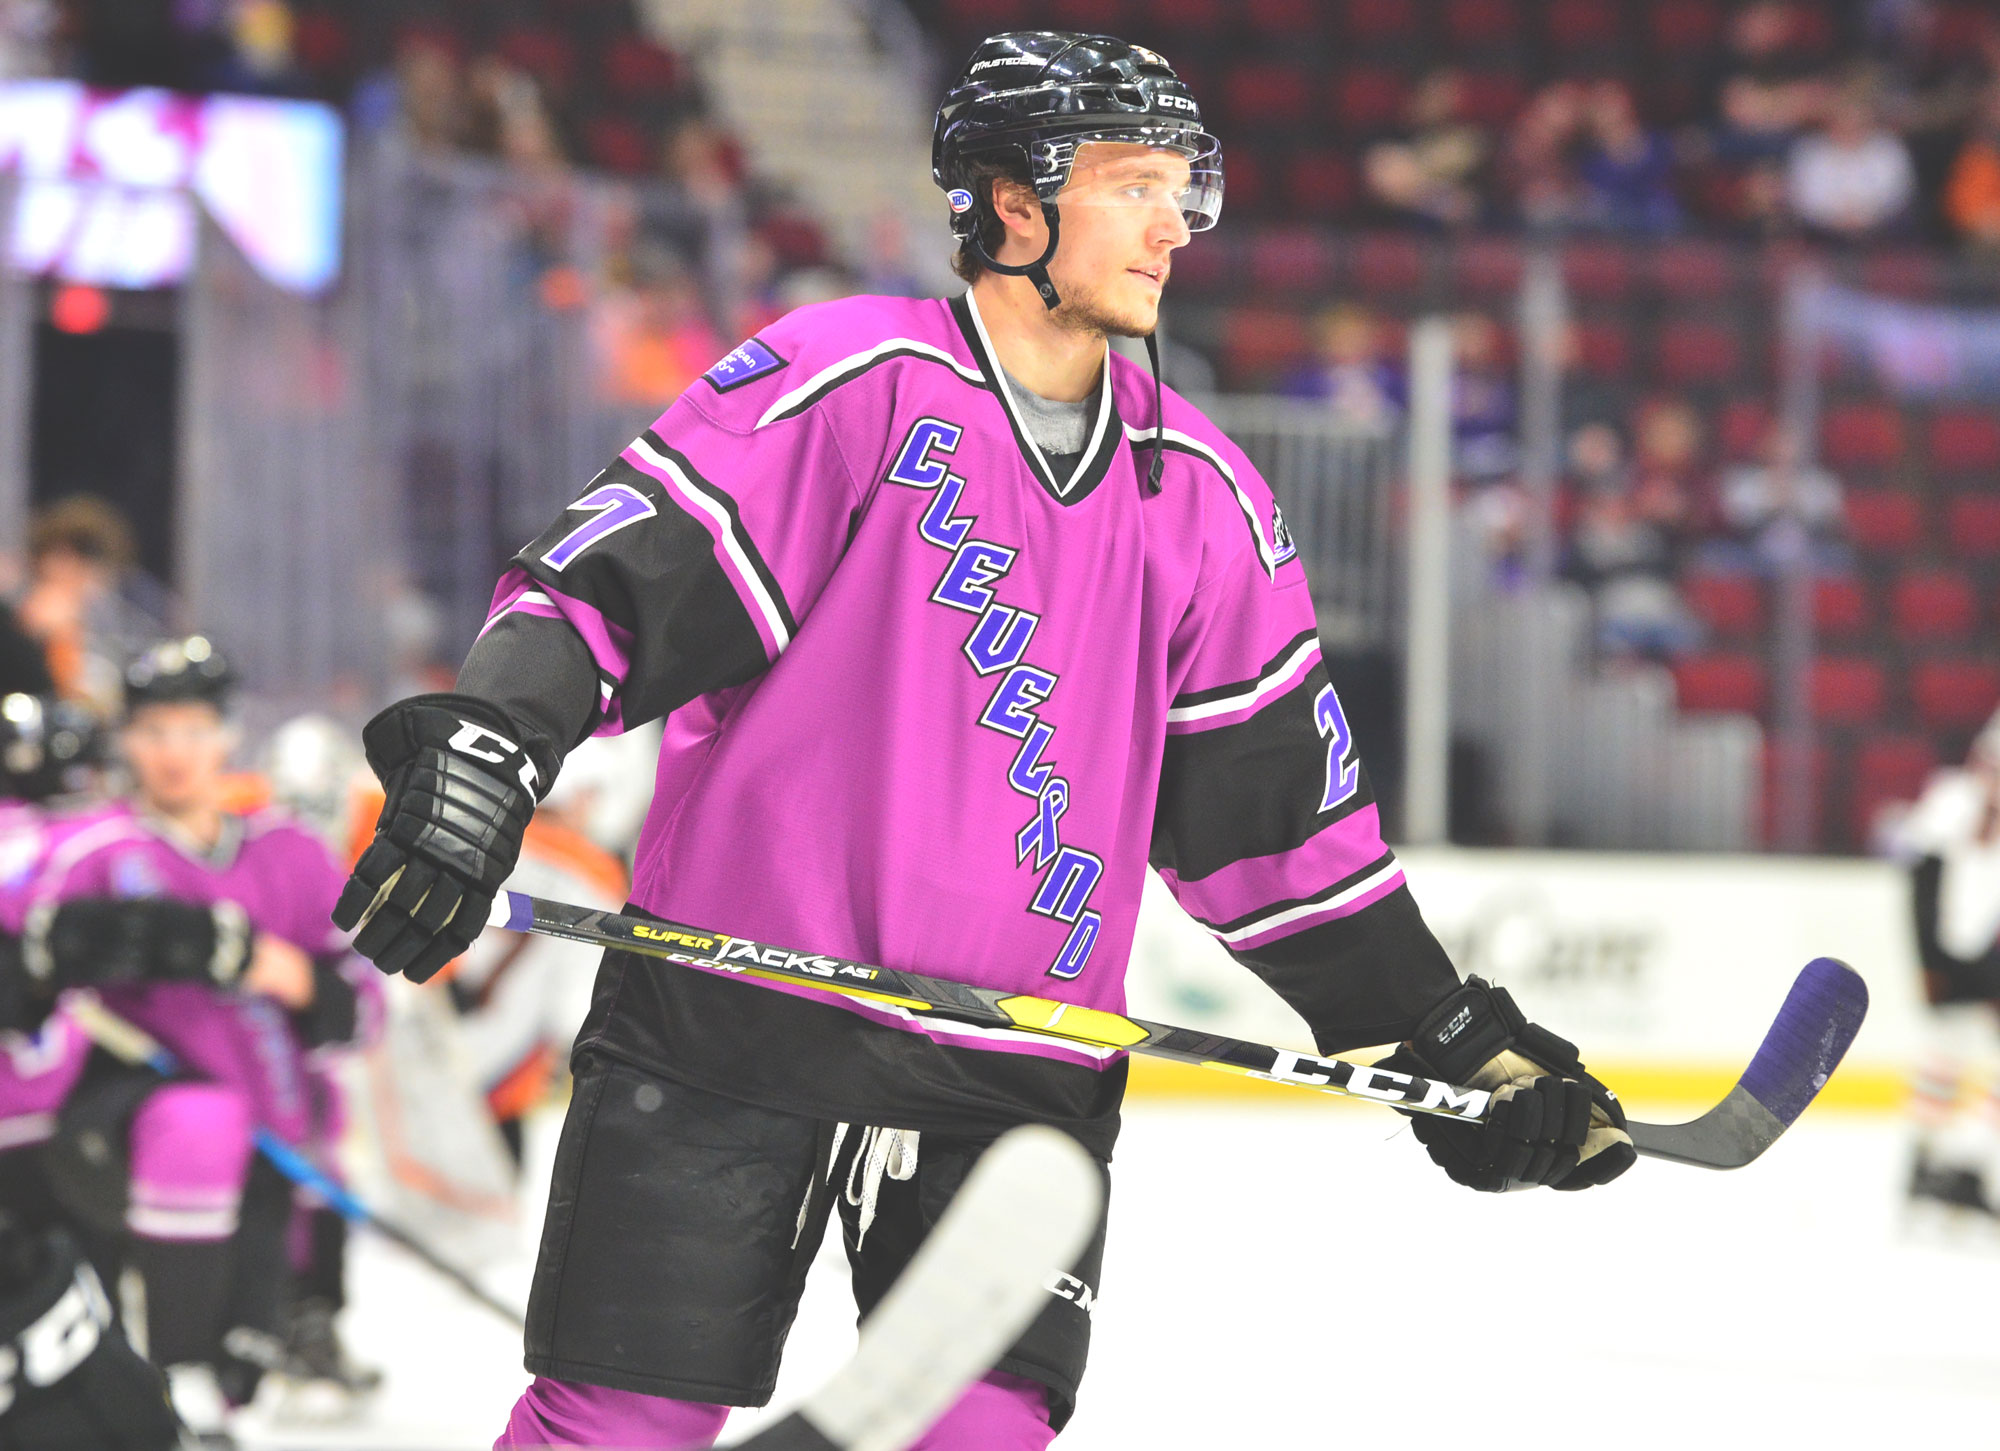 Cleveland Monsters - Check out these sweet jerseys and save the date! 💜  March 24 is the Purple Game 💜 Tickets ➡️